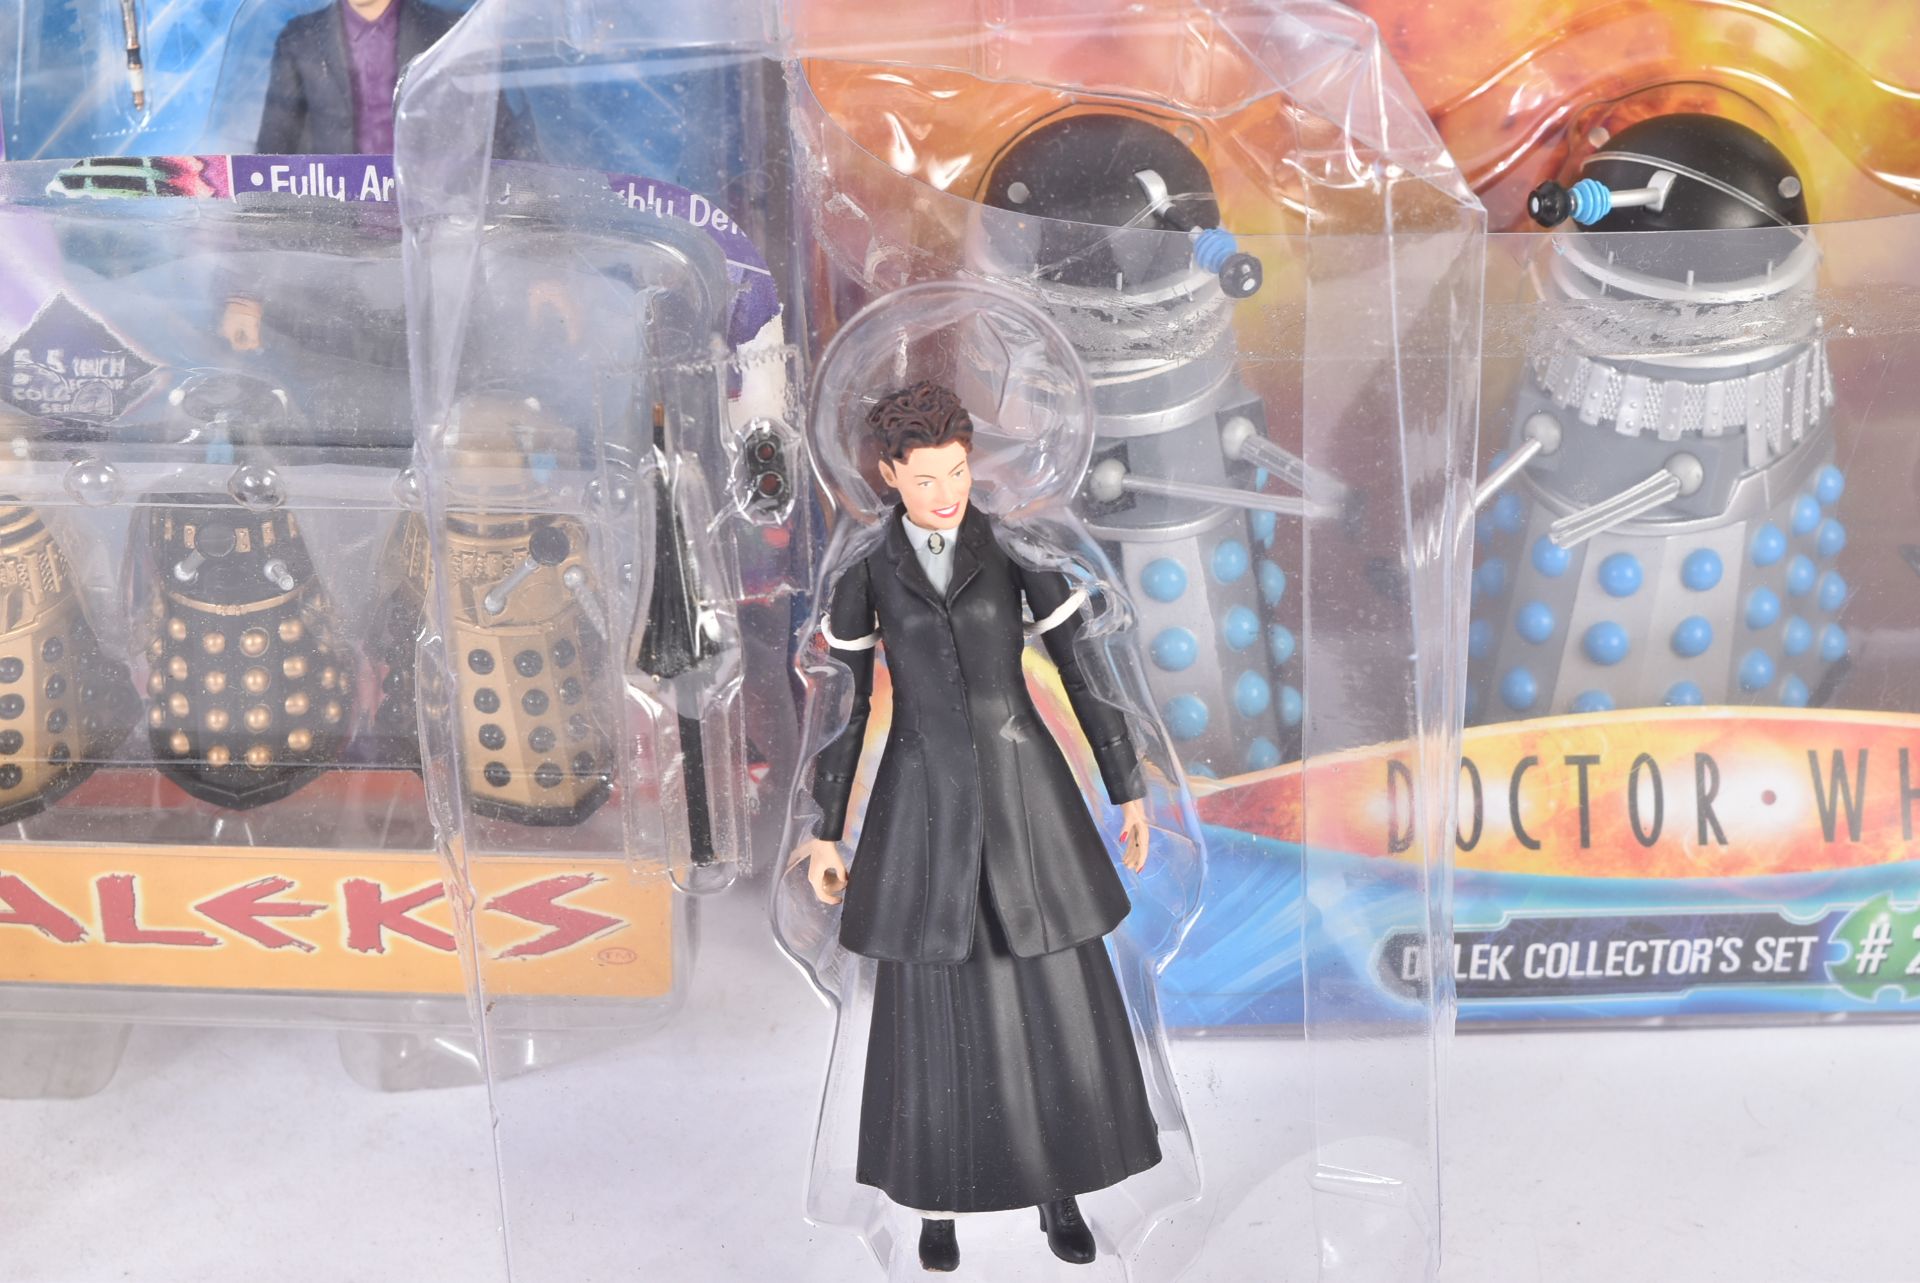 DOCTOR WHO - COLLECTION OF ASSORTED ACTION FIGURES - Image 5 of 7